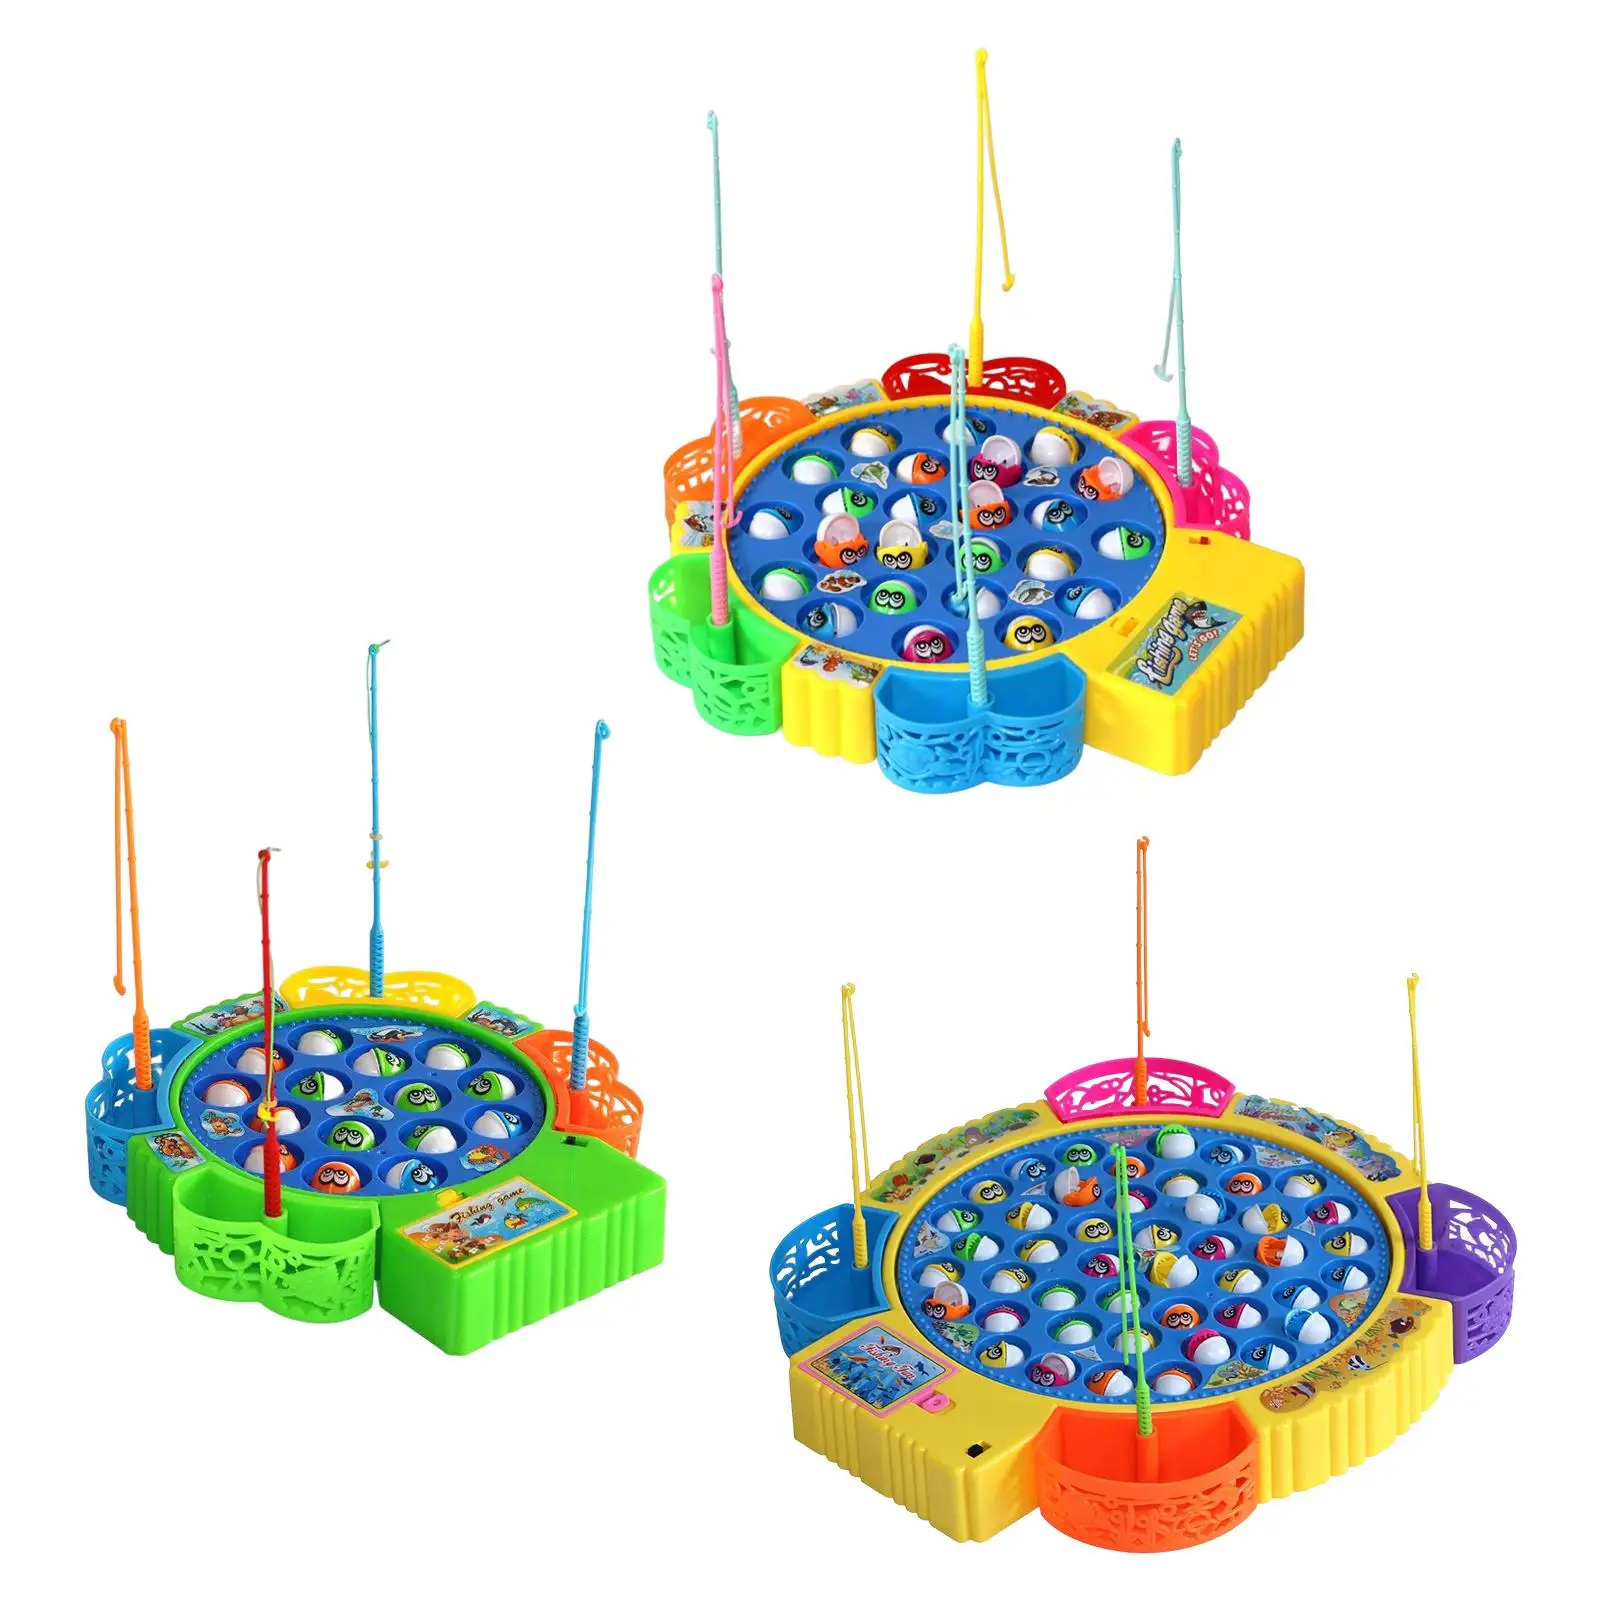 Novelty, Spinning Game, Kids Toy, Fine Motor Skill, Kids Toy, Game for 3-5 Years